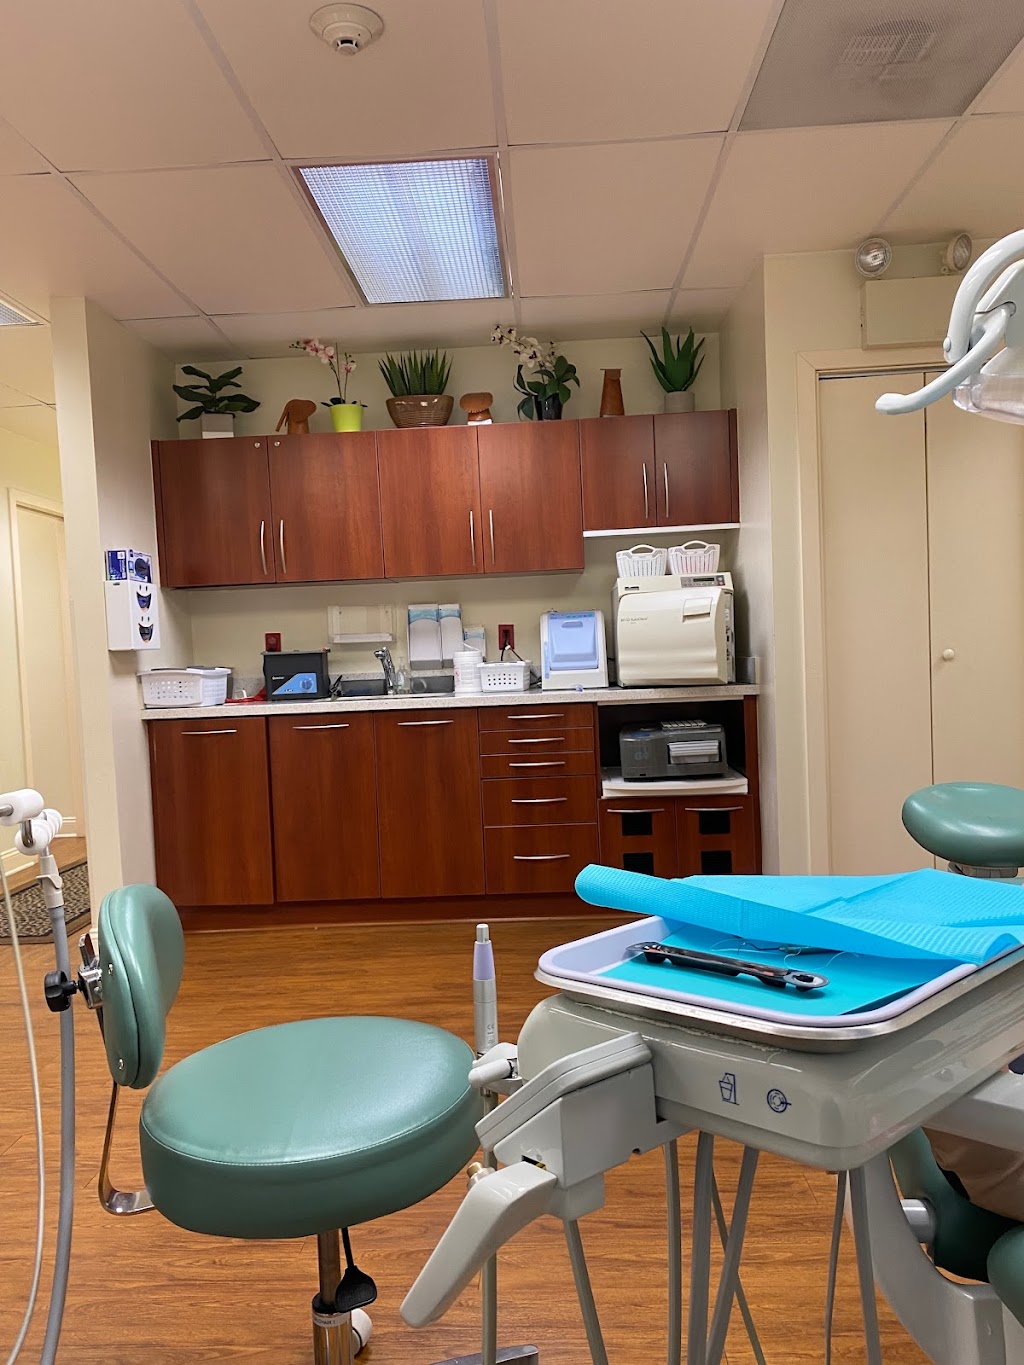 Eagle Crest Pediatric Dentistry | 31 S Eagle Rd, Havertown, PA 19083 | Phone: (484) 454-3568